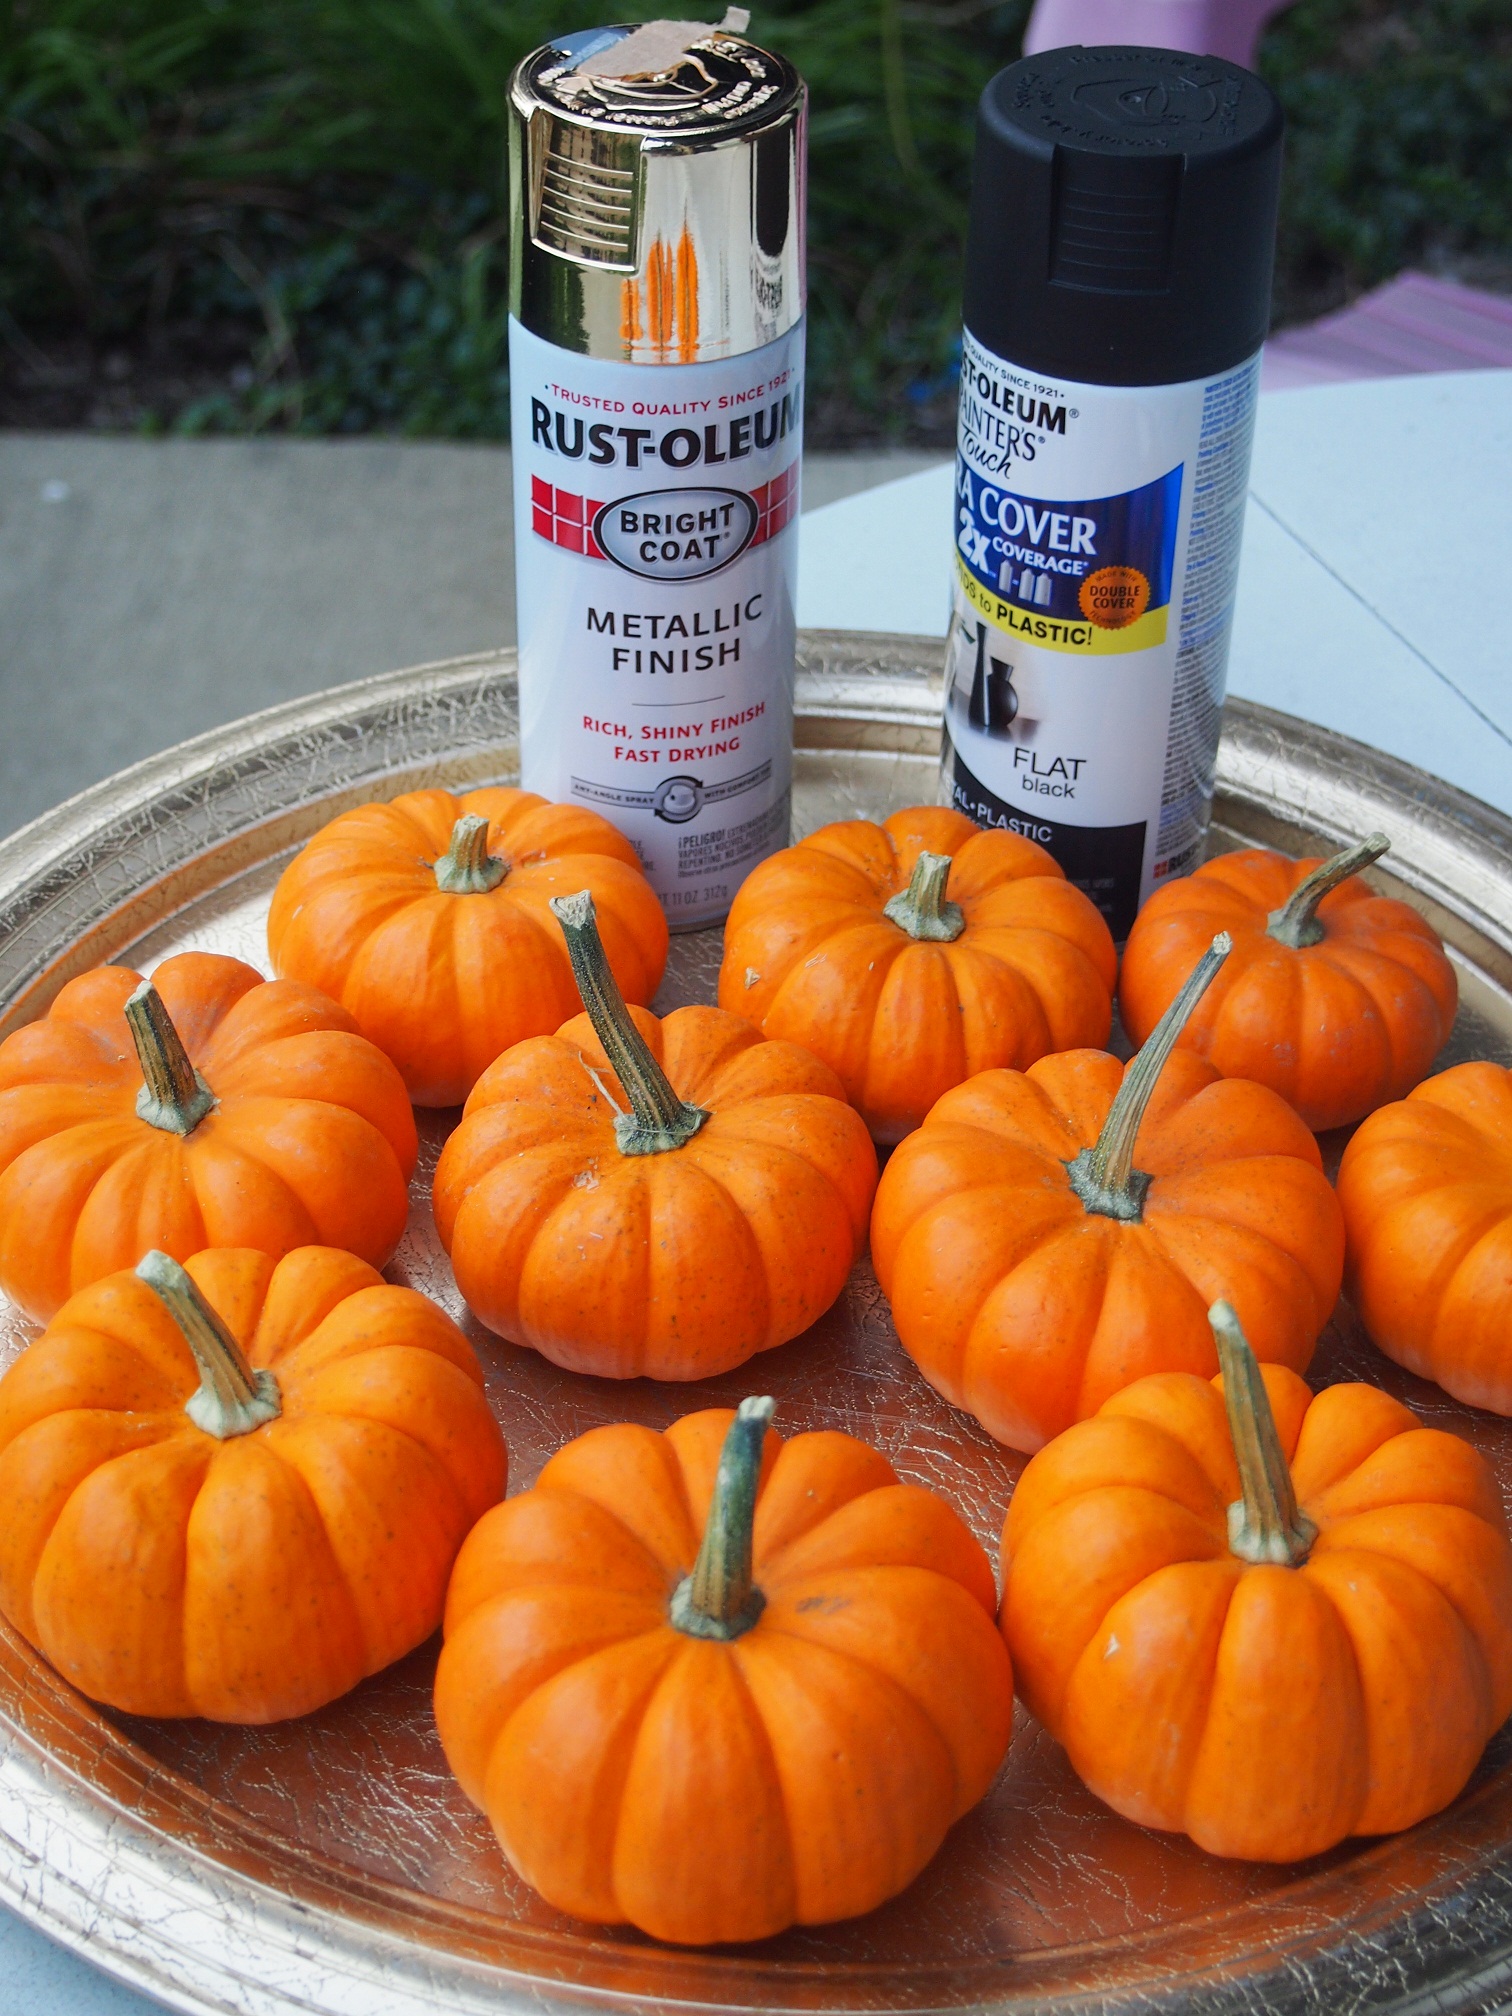 Nomad luxuries photo of diy materials with pumpkins and spray paint.